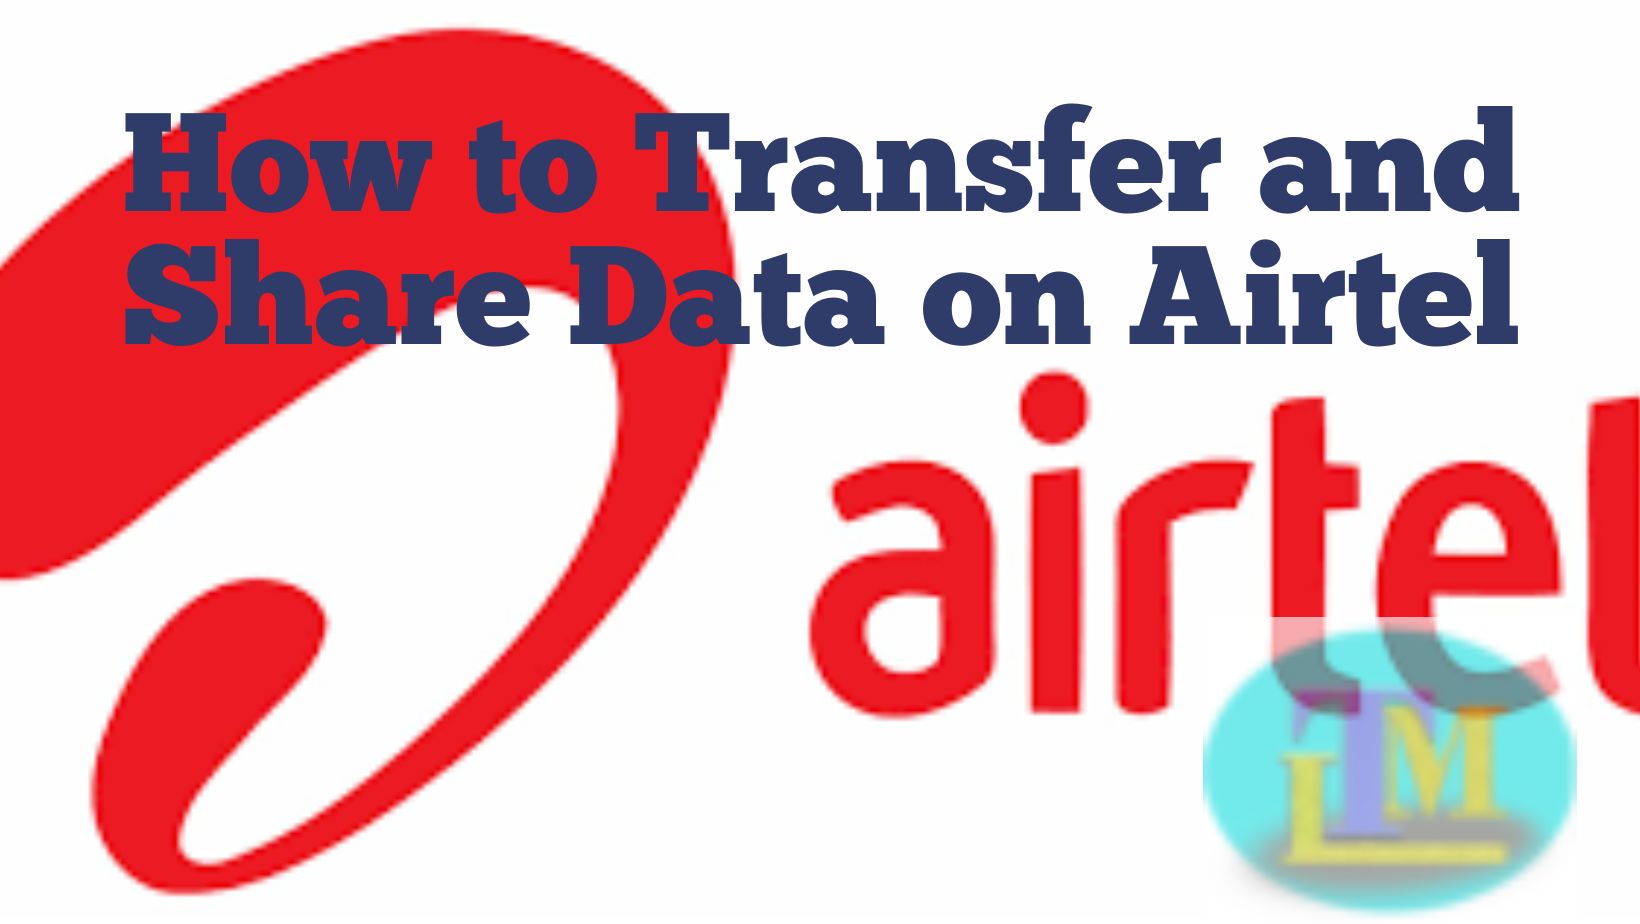 How to Transfer and Share Data on AirtelHow to Transfer and Share Data on Airtel